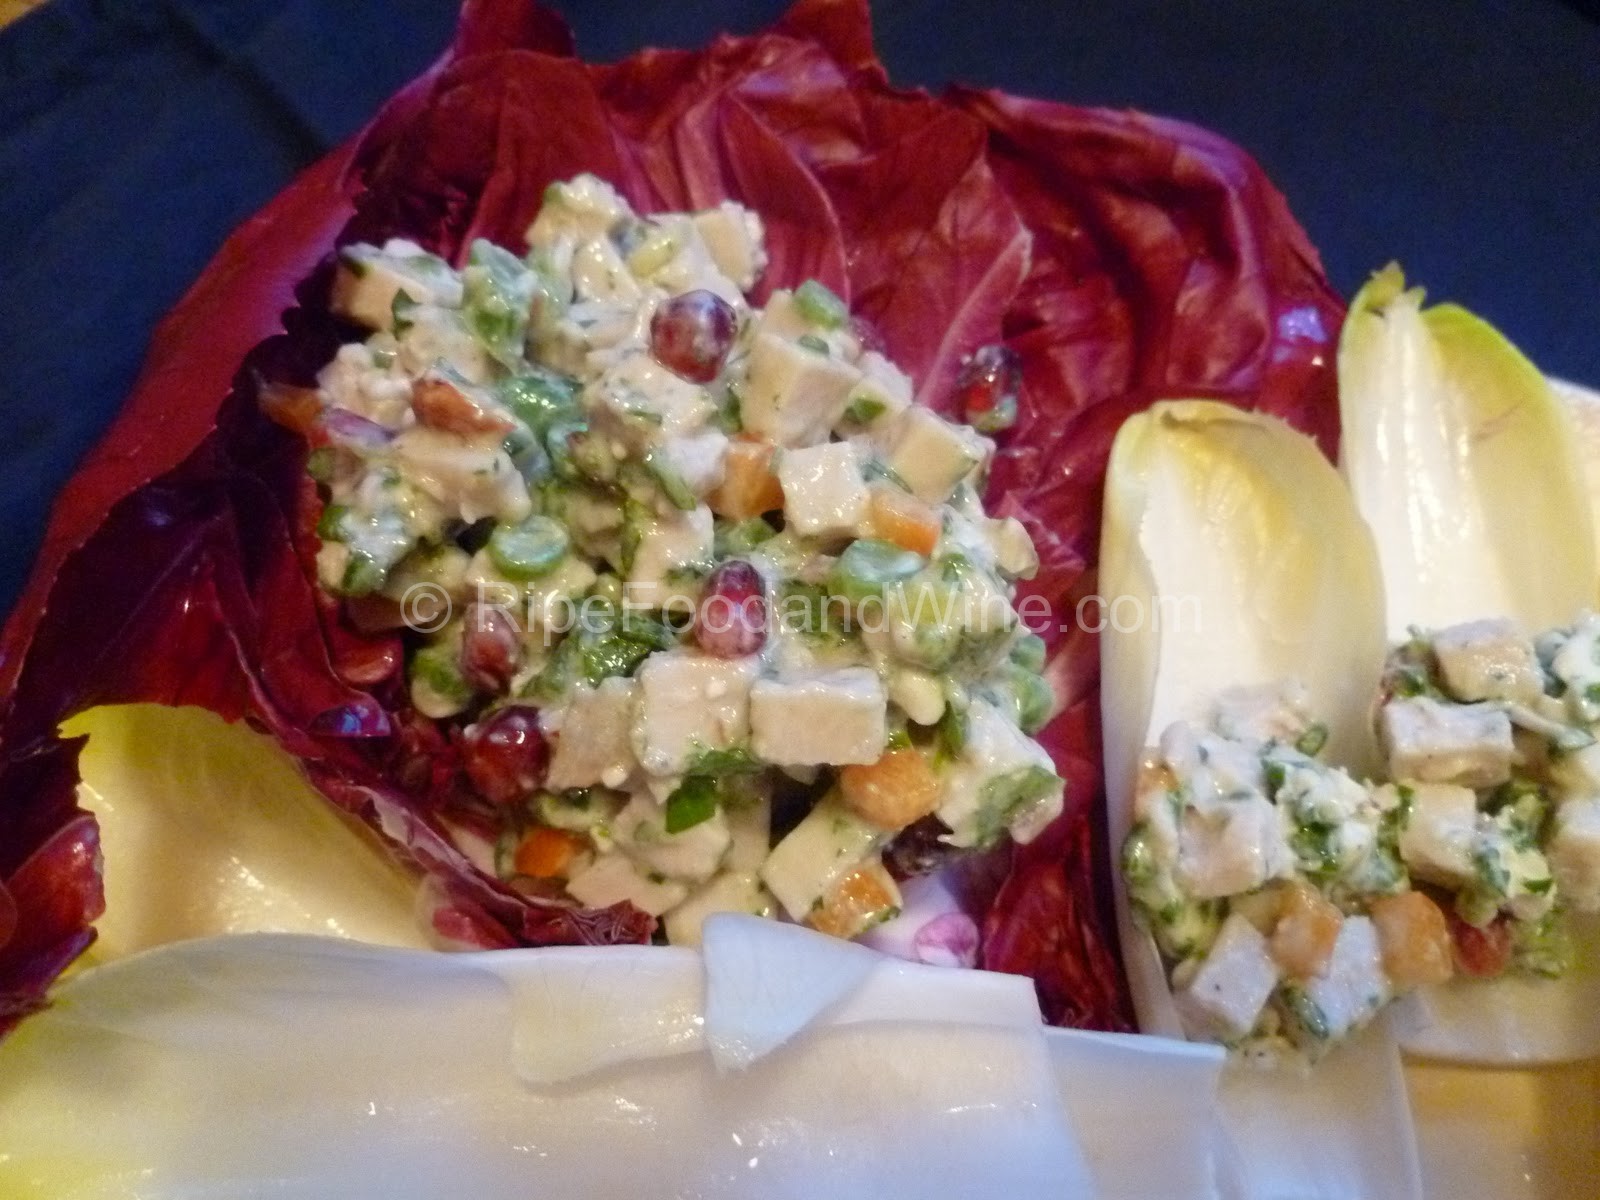 Smoked Turkey and Blue Cheese Salad in Endive Spears